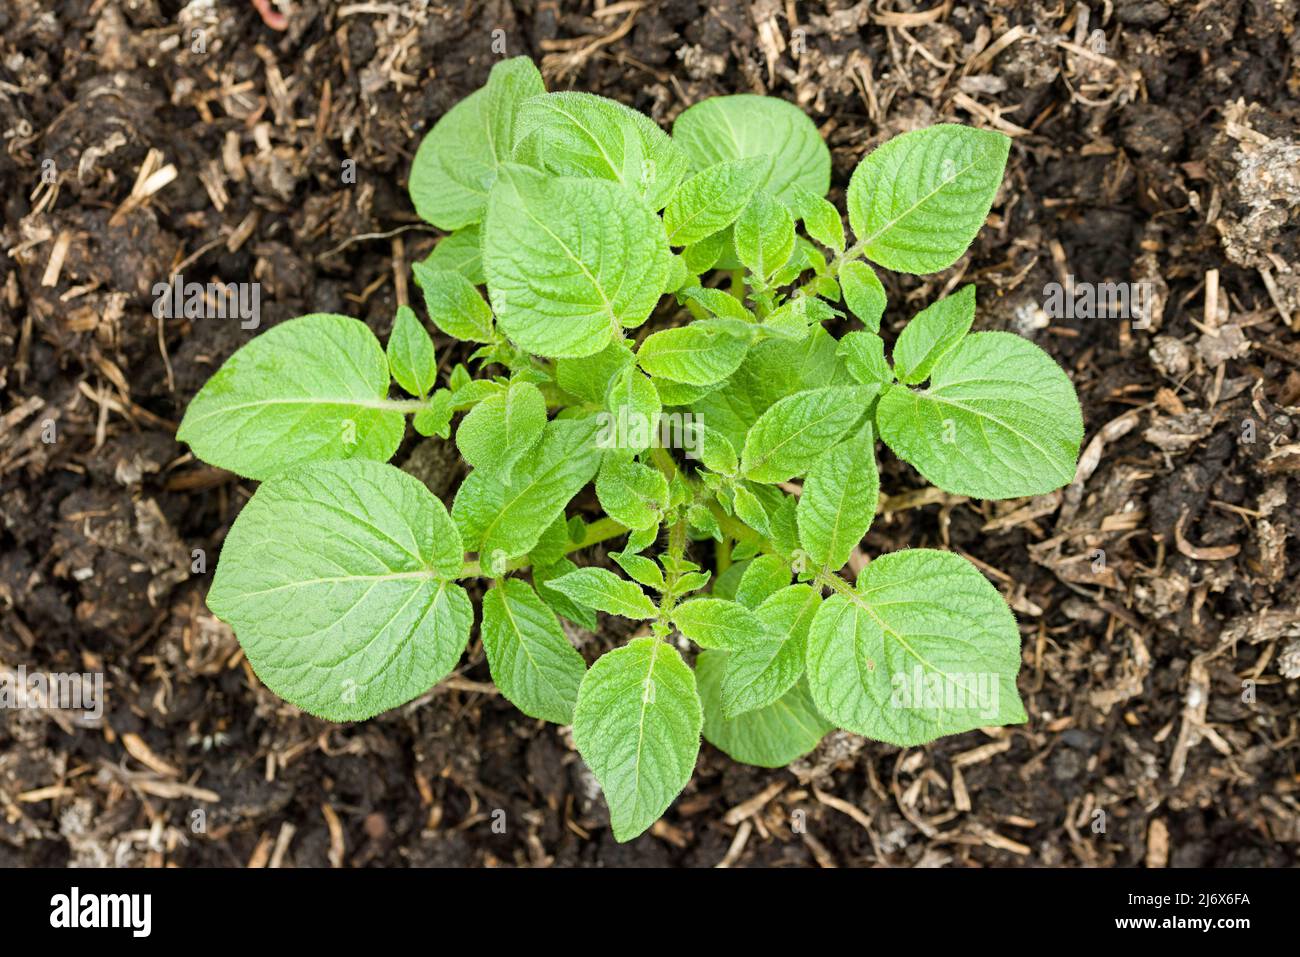 Young Charlotte second early potato plant growing in a no-dig style vegetable garden in spring. Stock Photo